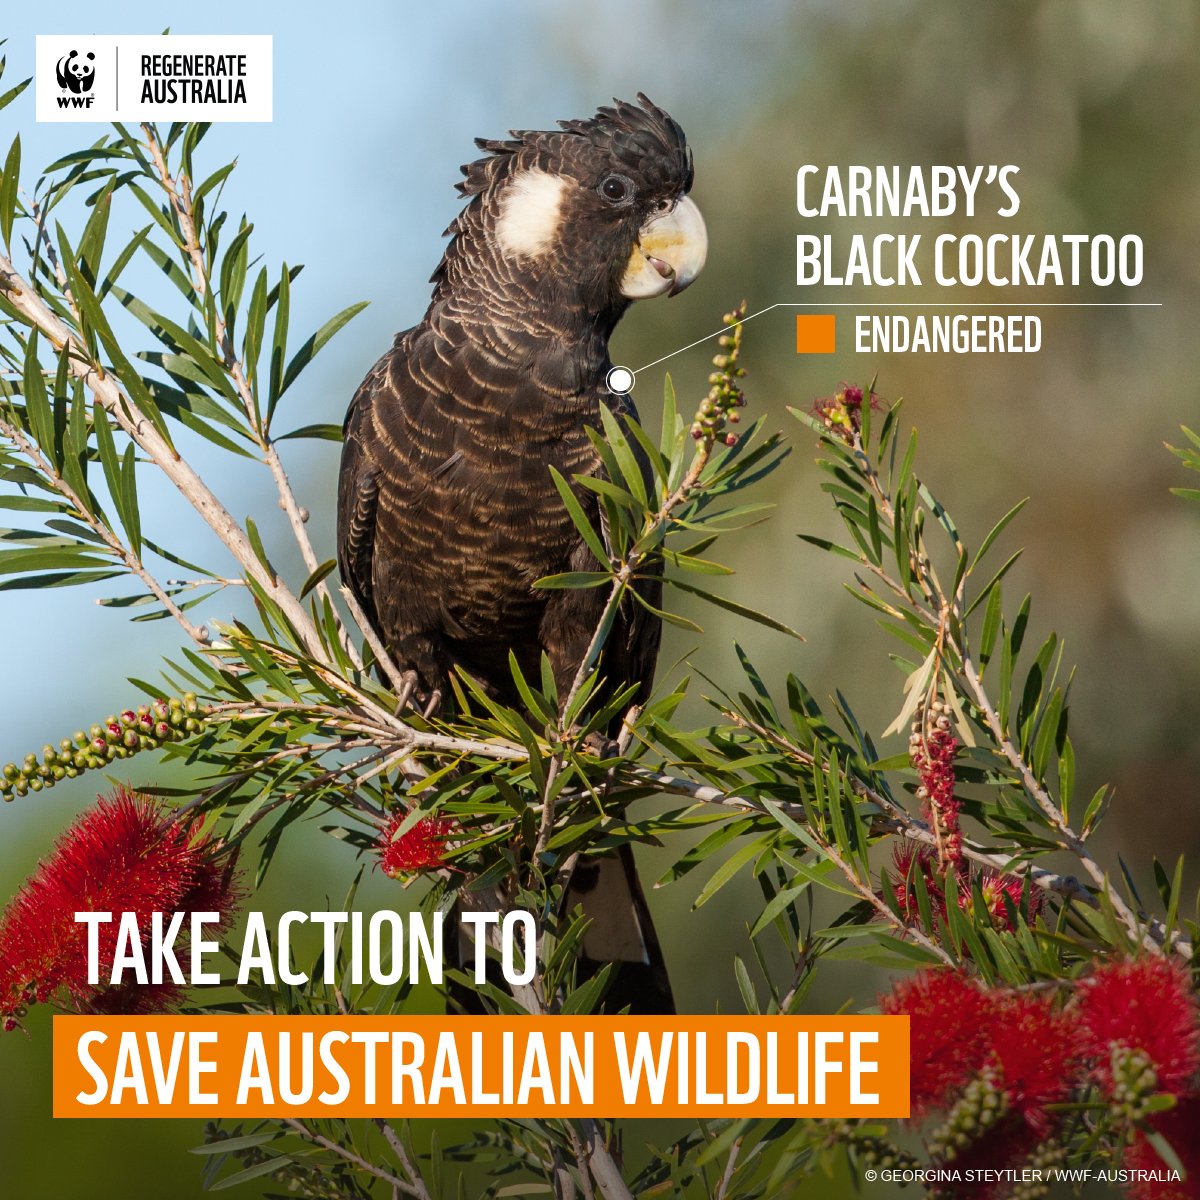 Also known as the short-billed cockatoo, males and females can be distinguished by the colour of their beaks! Females have white beaks and the males have black. Send a message to demand stronger nature laws to protect wildlife: wwfau.org/protect-wildli…